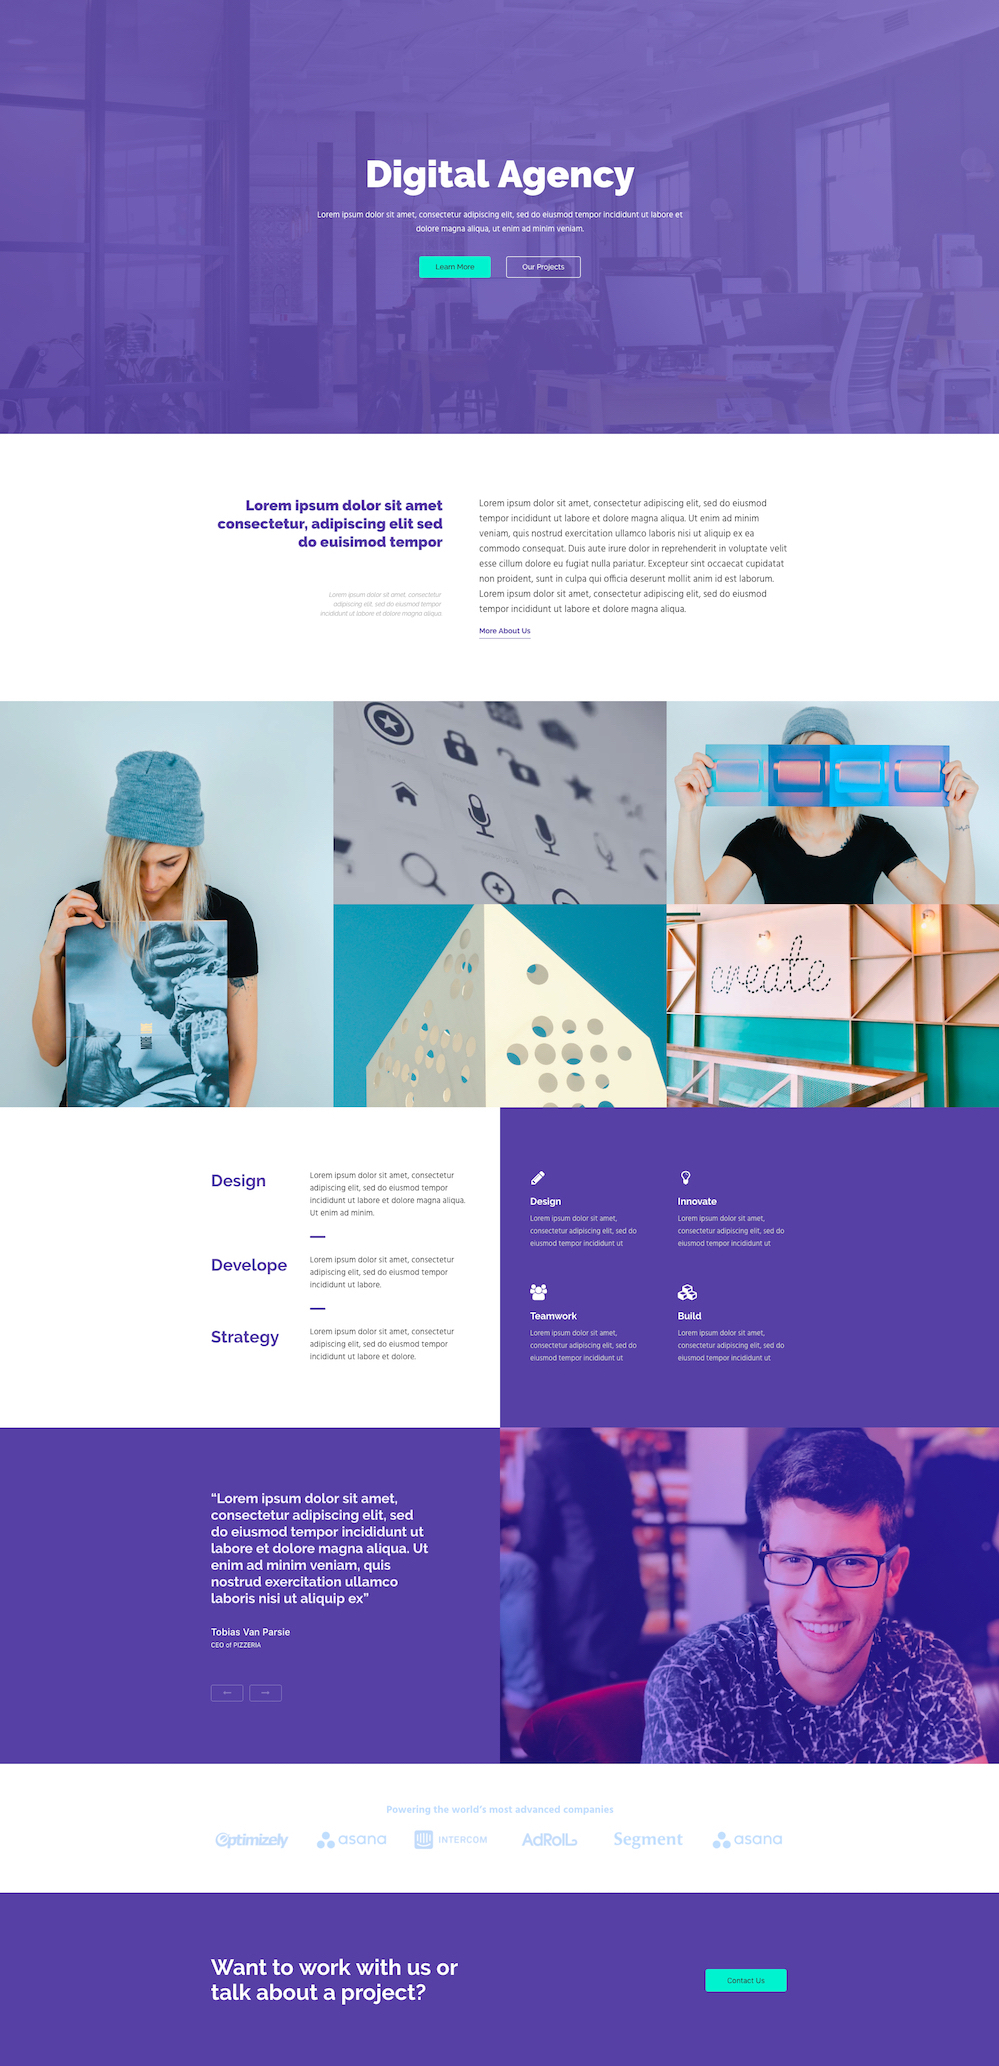 Introducing Digital Agency layout bundle for SP Page Builder Pro